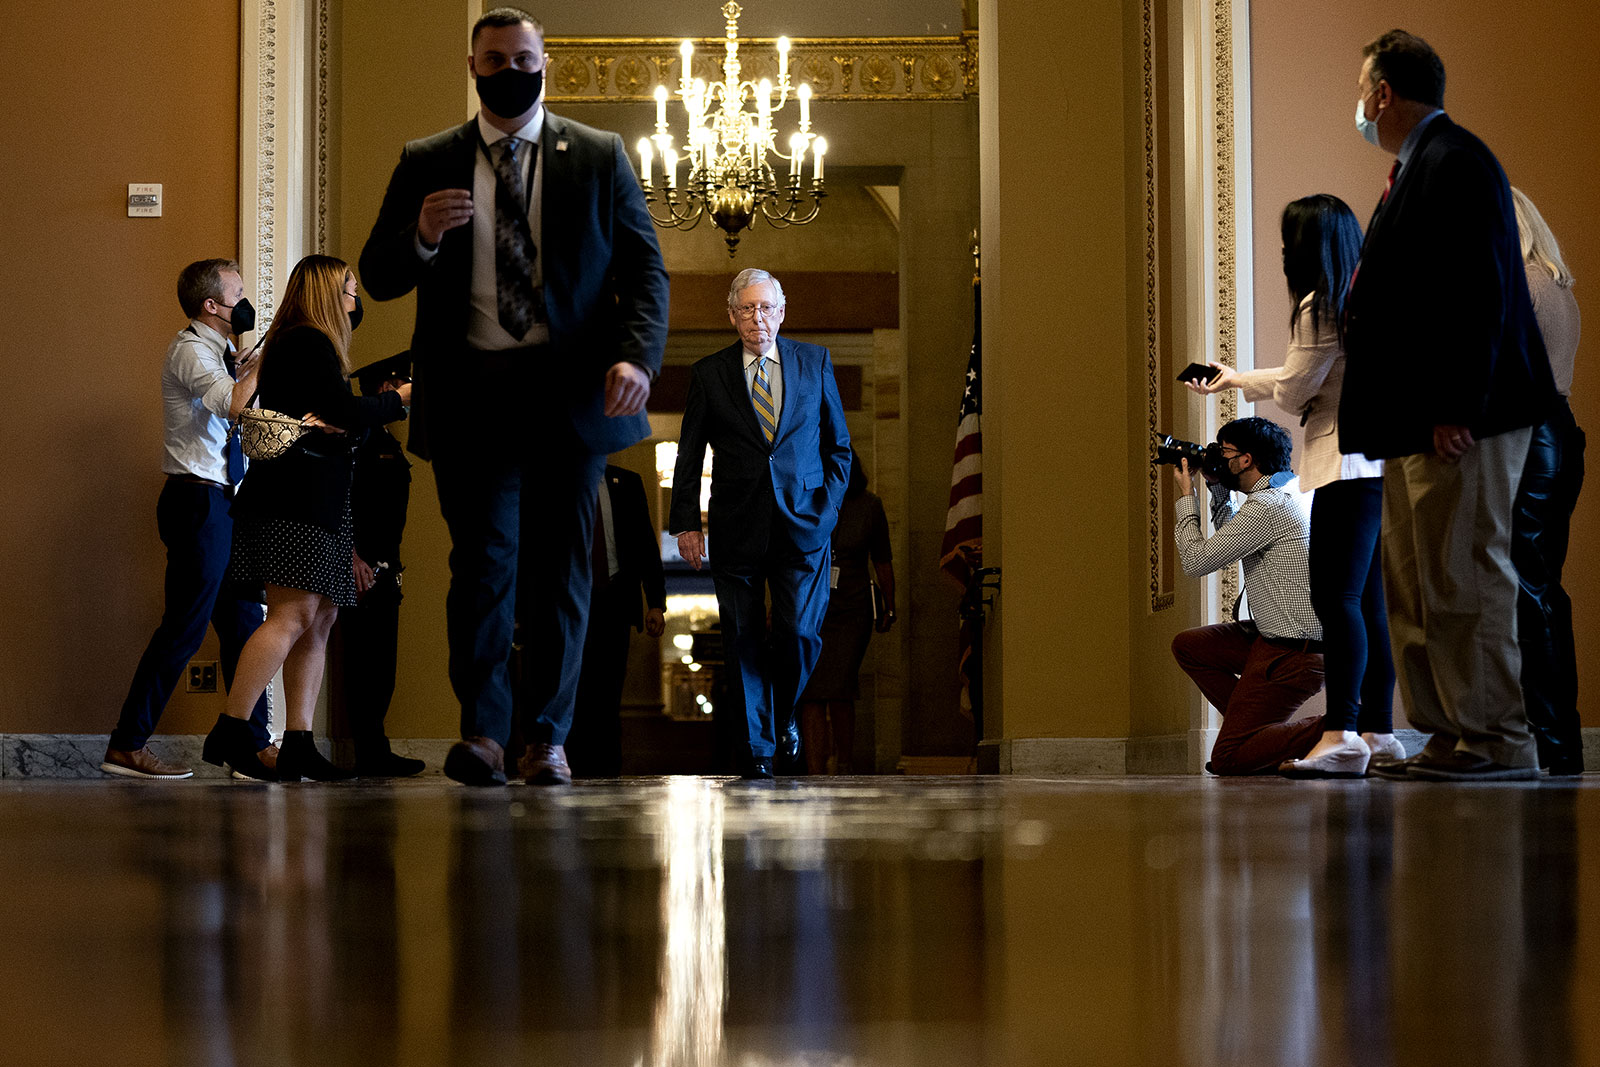 Senate Minority Leader Mitch McConnell, center, walks to the Senate chamber on October 6.